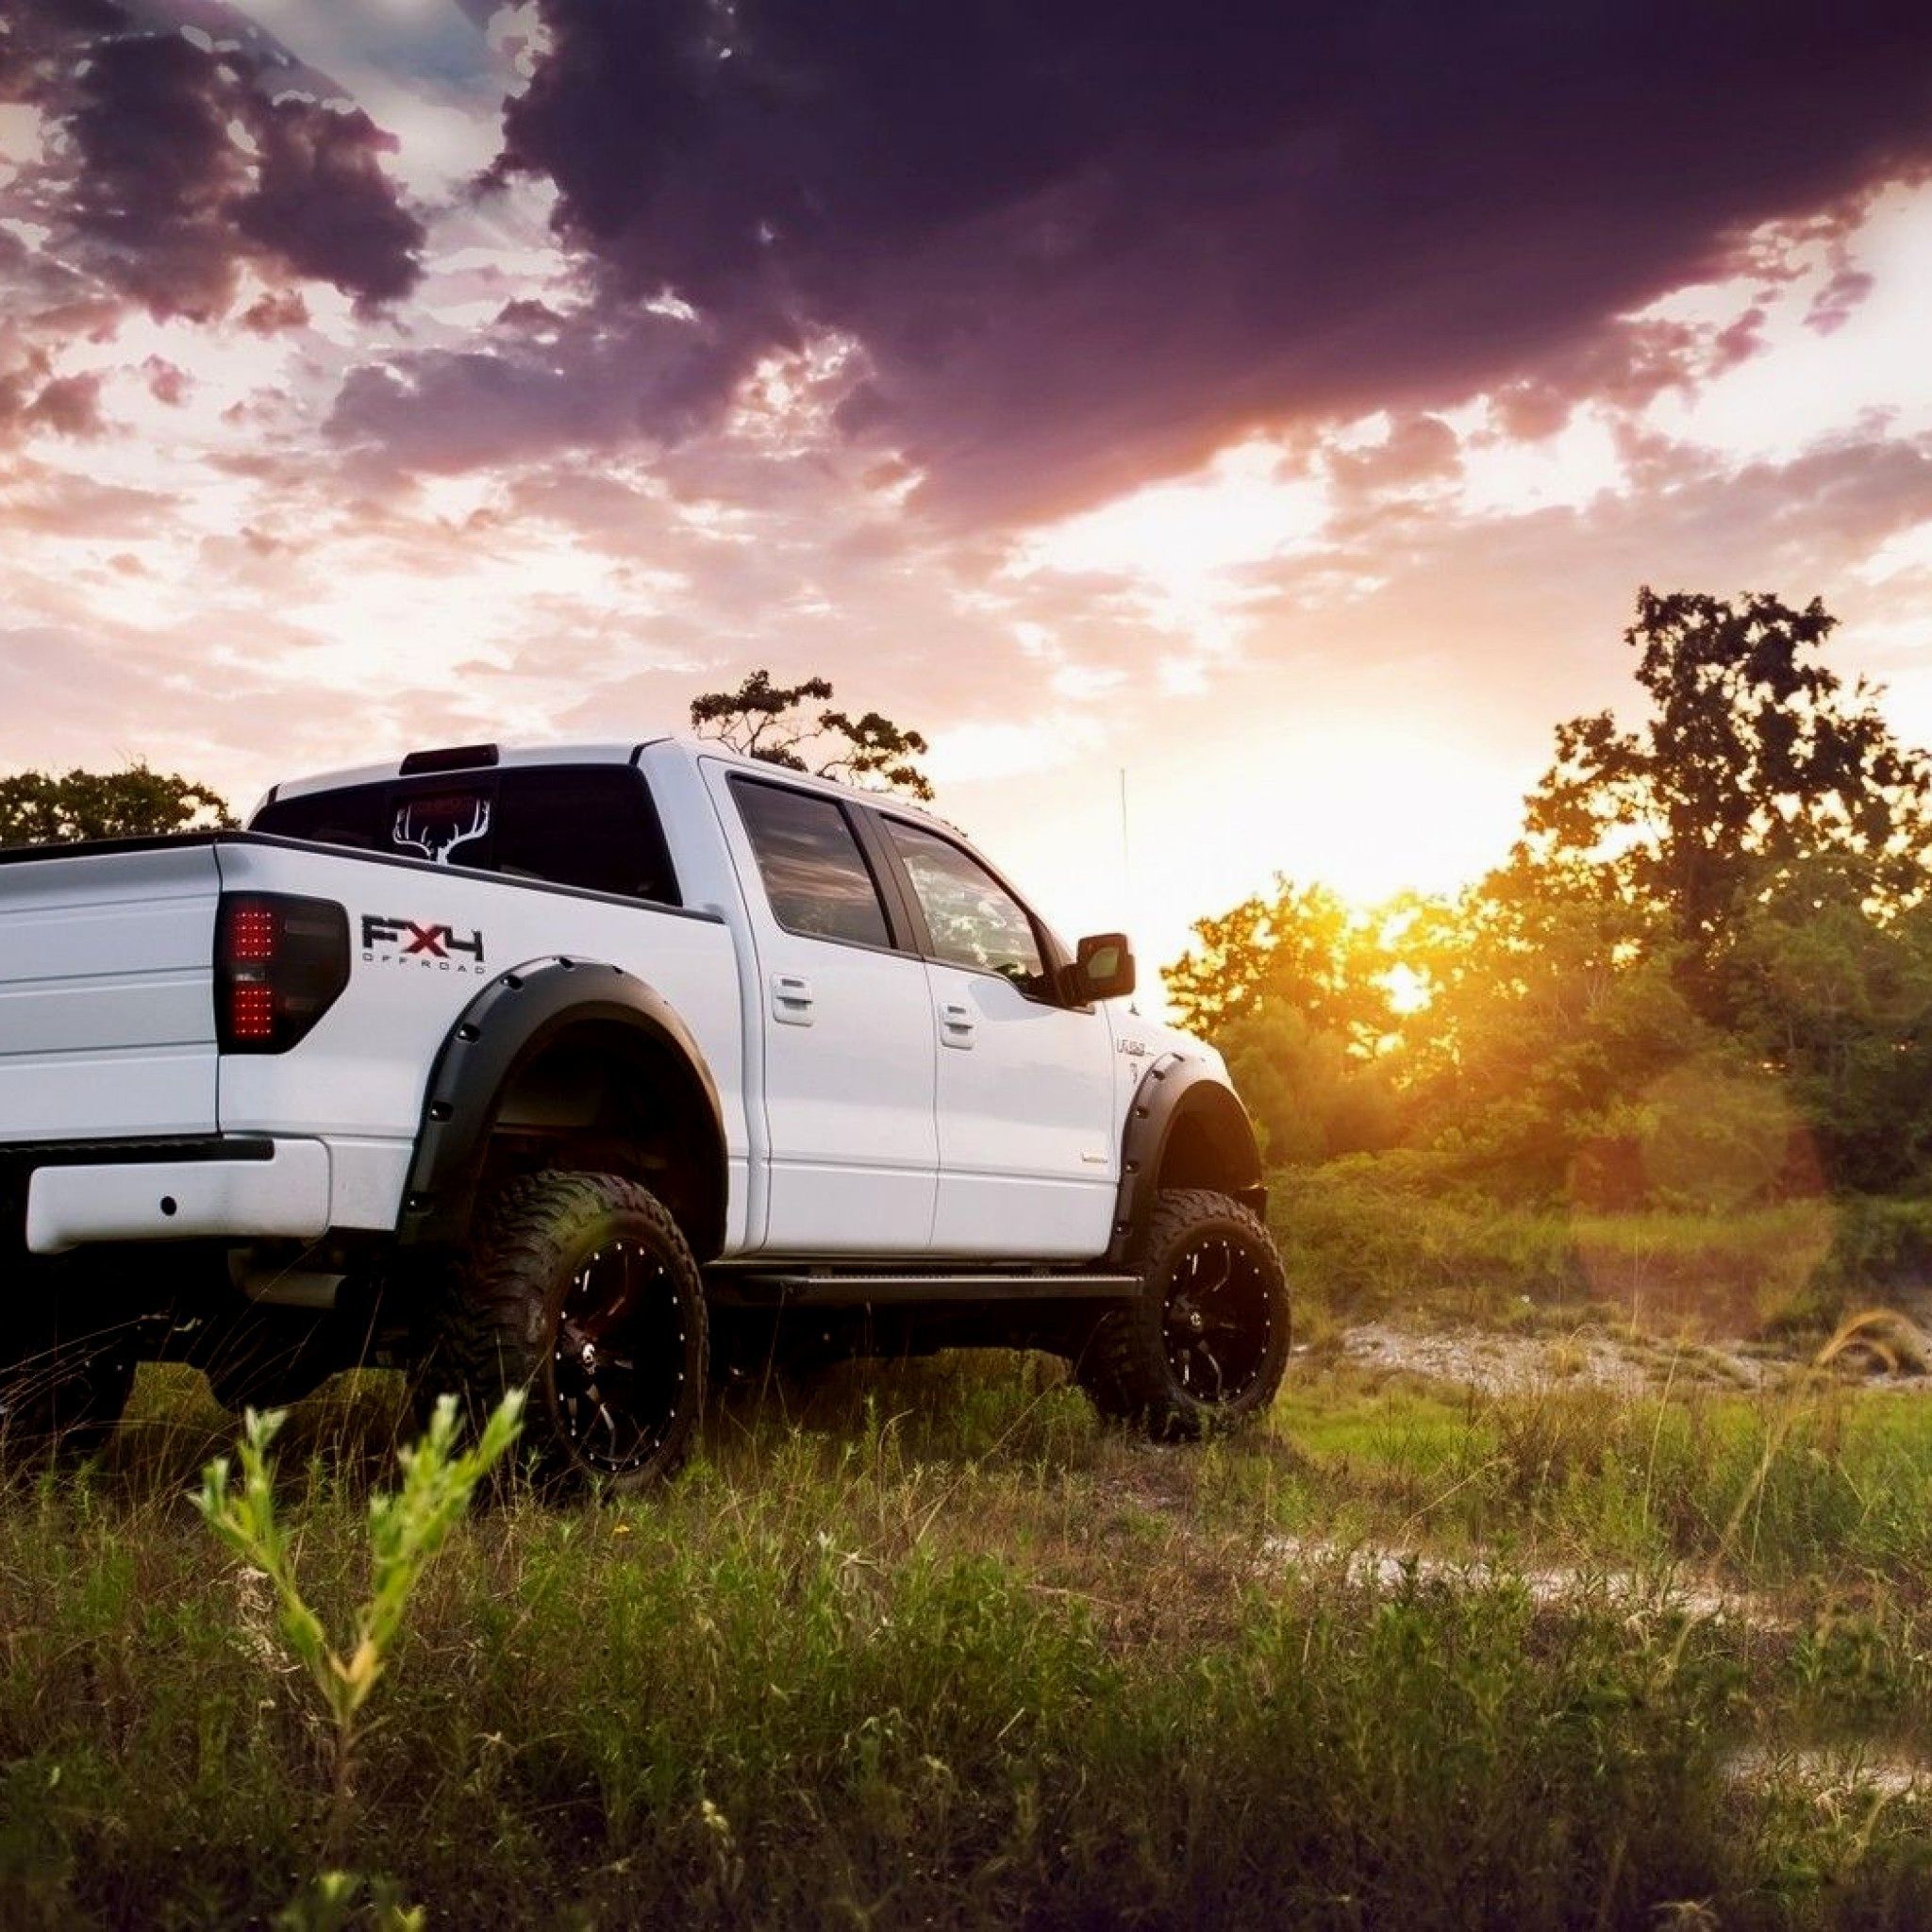 Ford Truck Wallpaper For iPhone HD Wallpaper